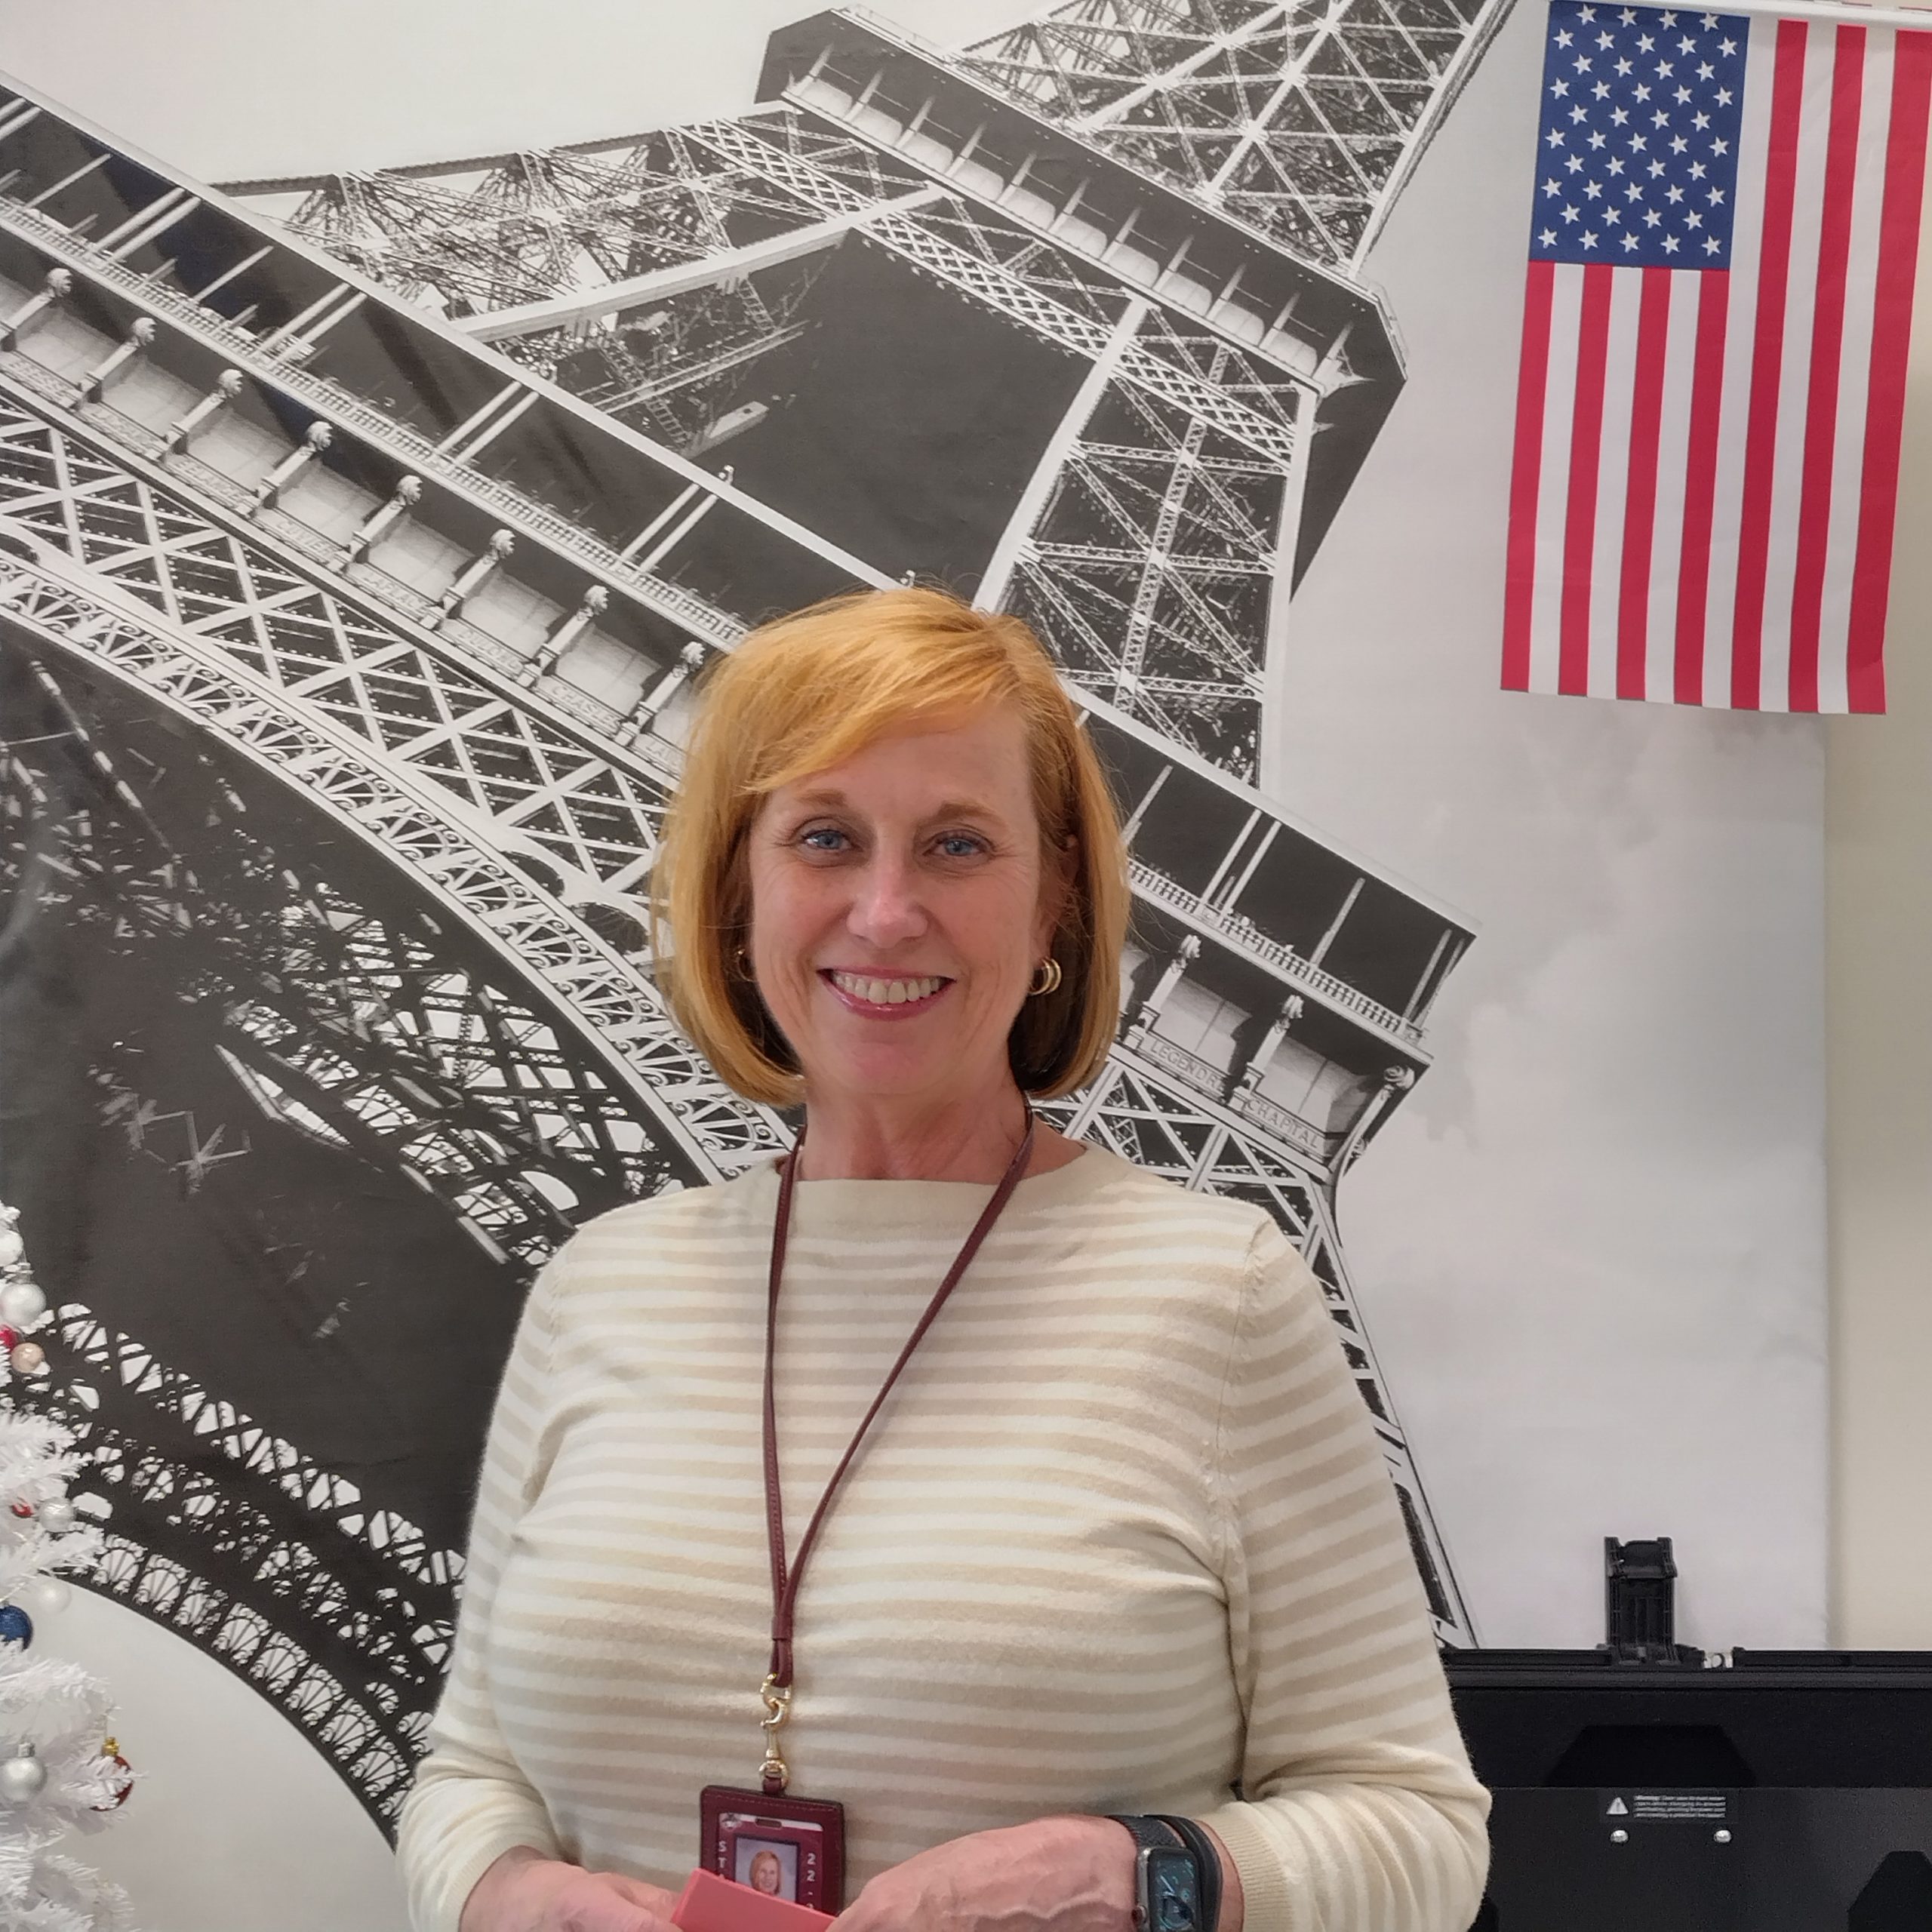 Mrs Knick standing with pride in front of an Eiffel Tower painting in the french clubs room.